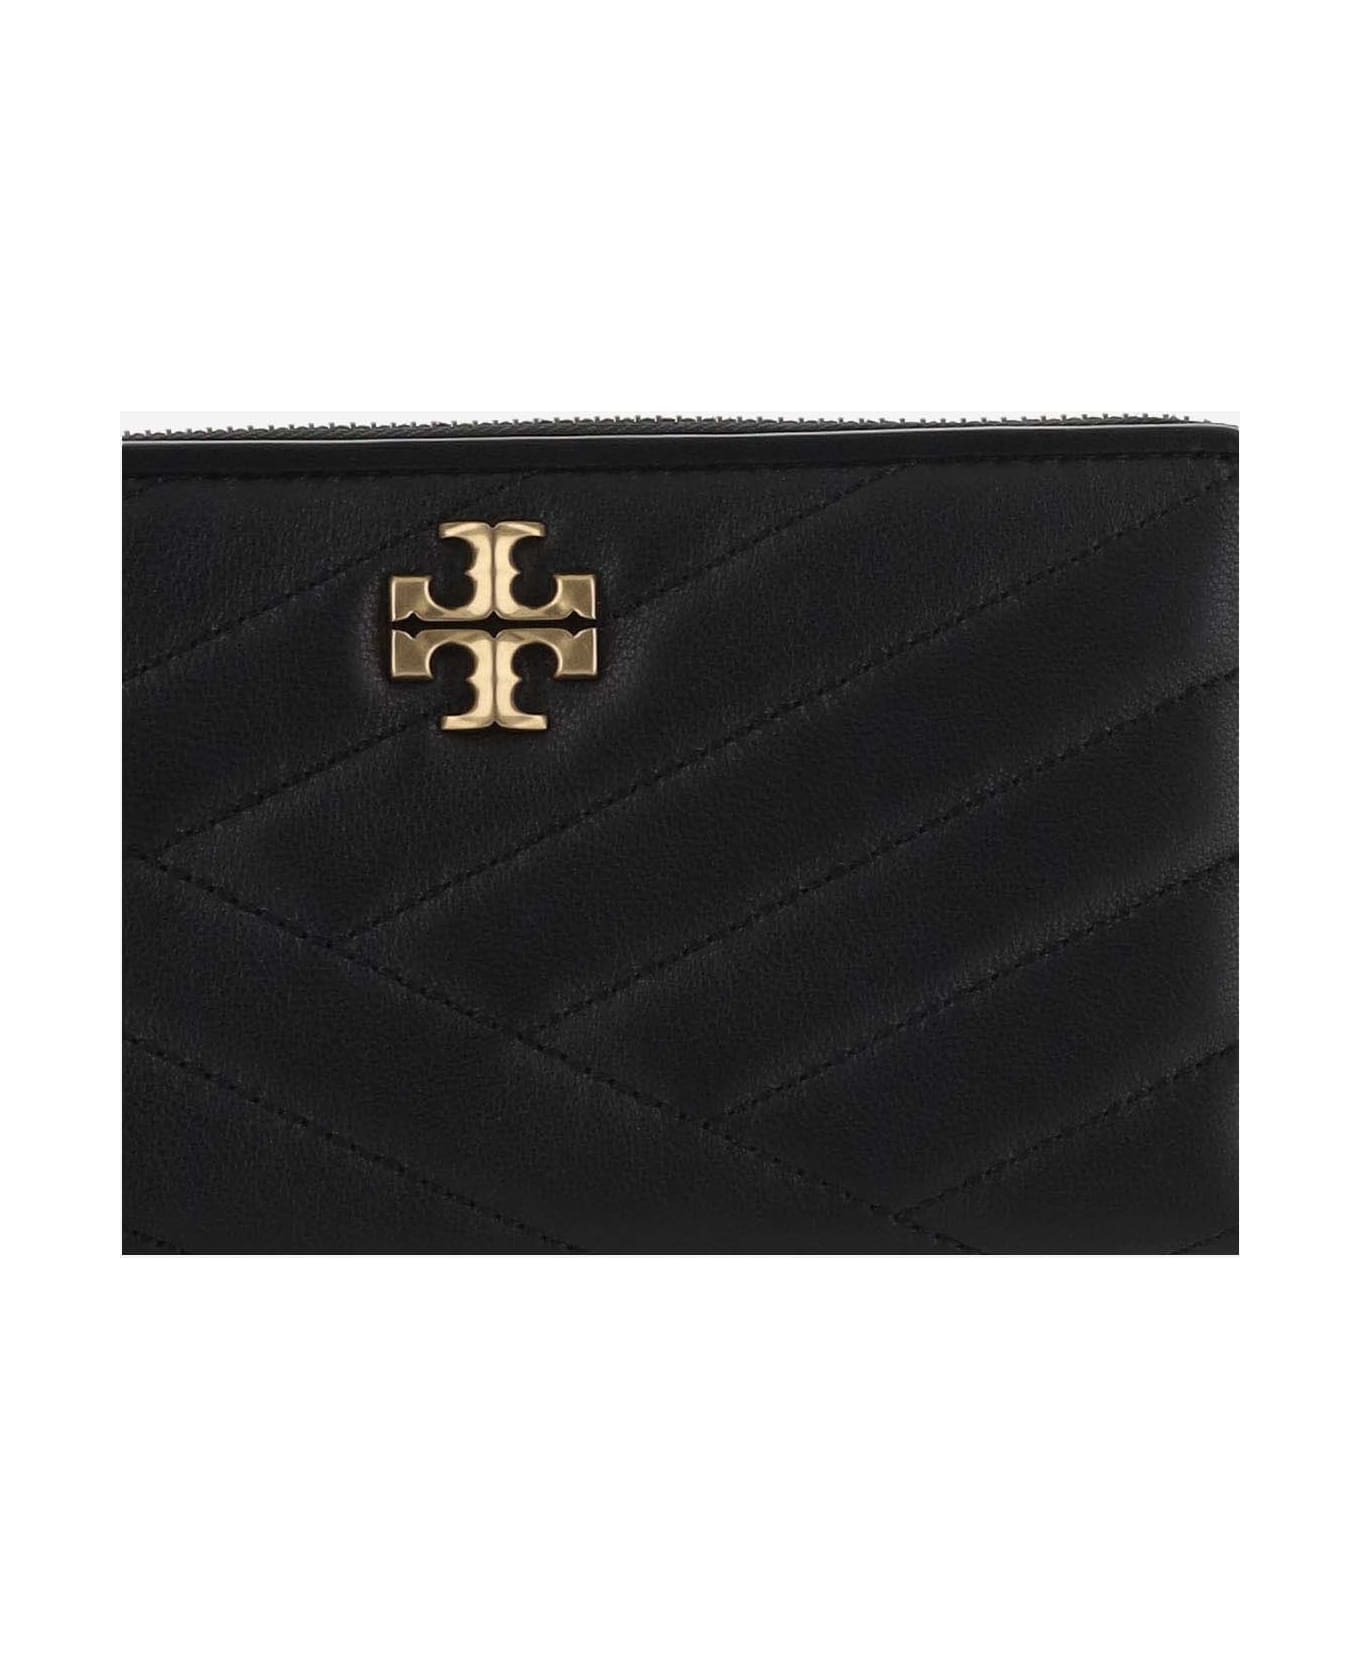 Tory Burch Continental Kira Leather Wallet - Black